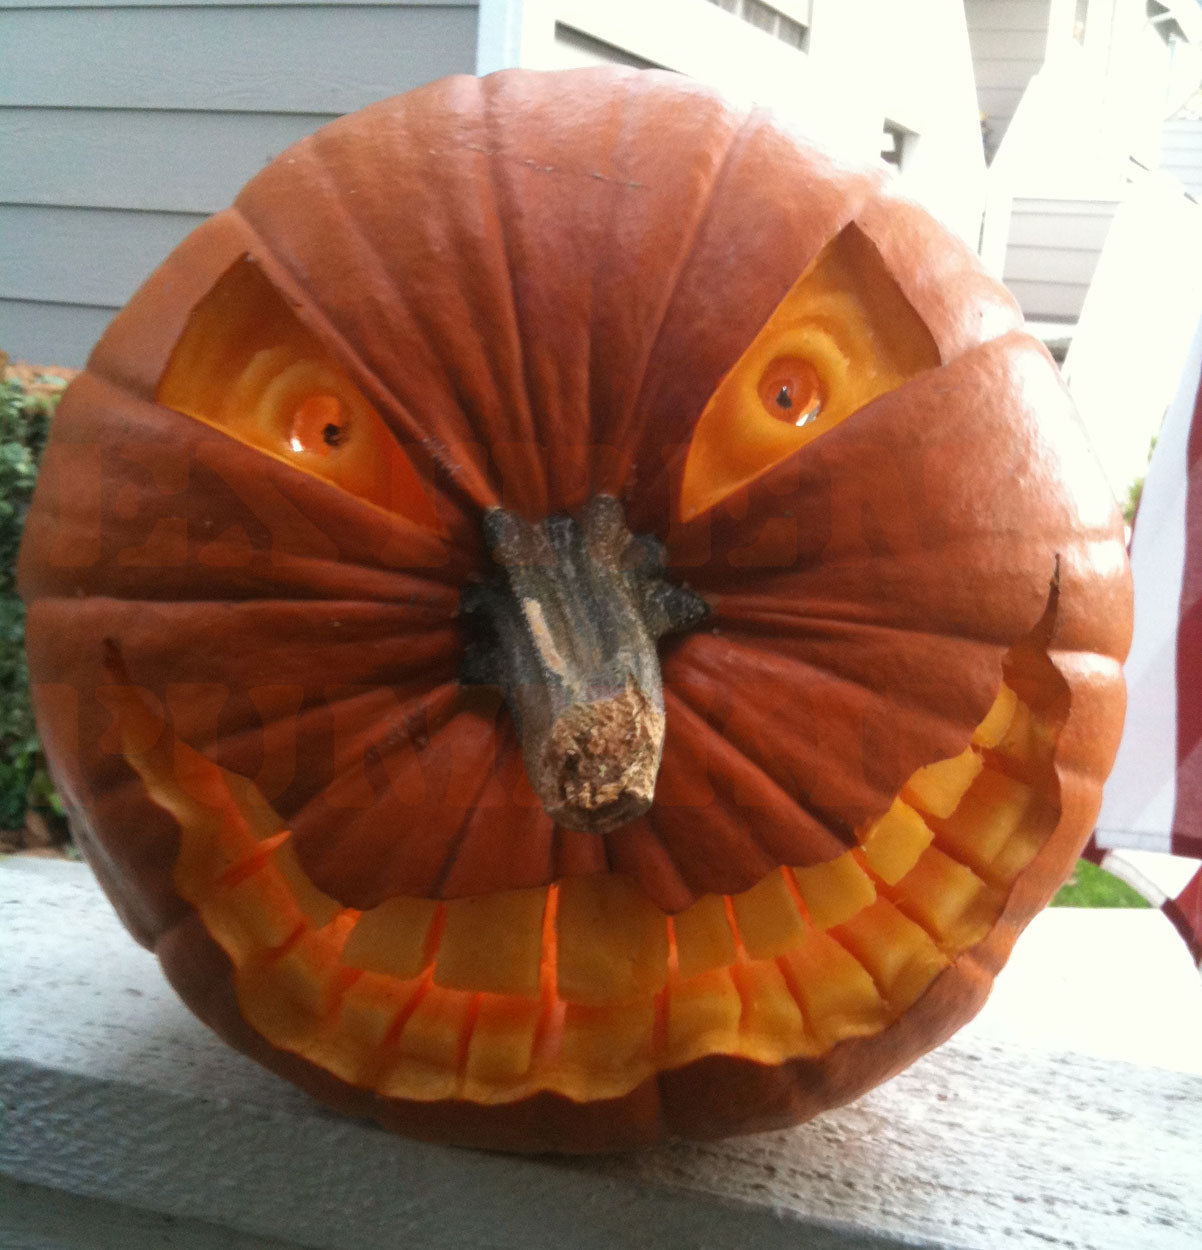 I Like The Eyes and Teeth On This Pumpkin